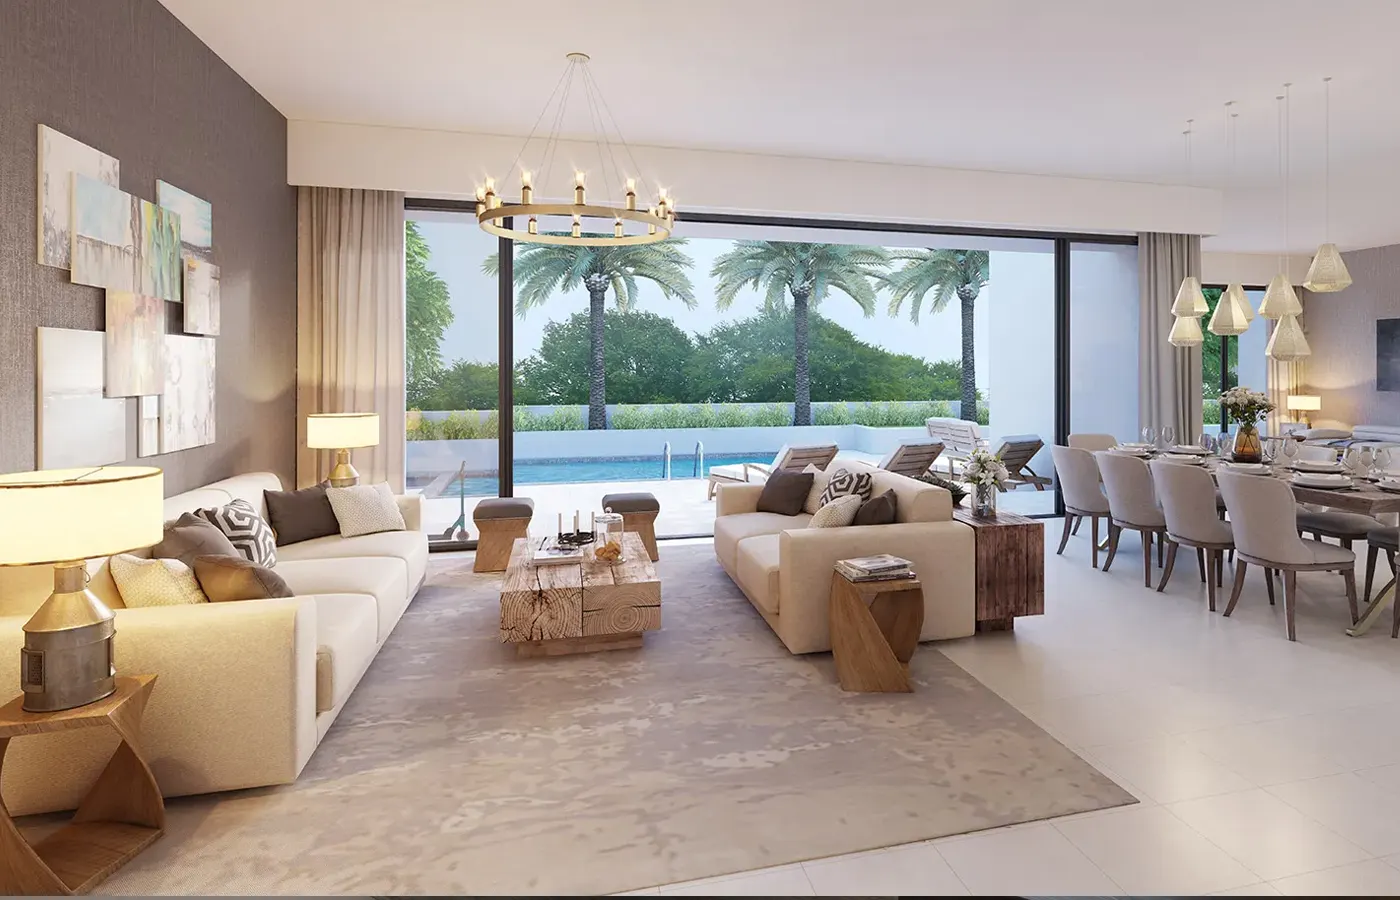 Dubai Top Best Luxury Interior Design Residential Projects